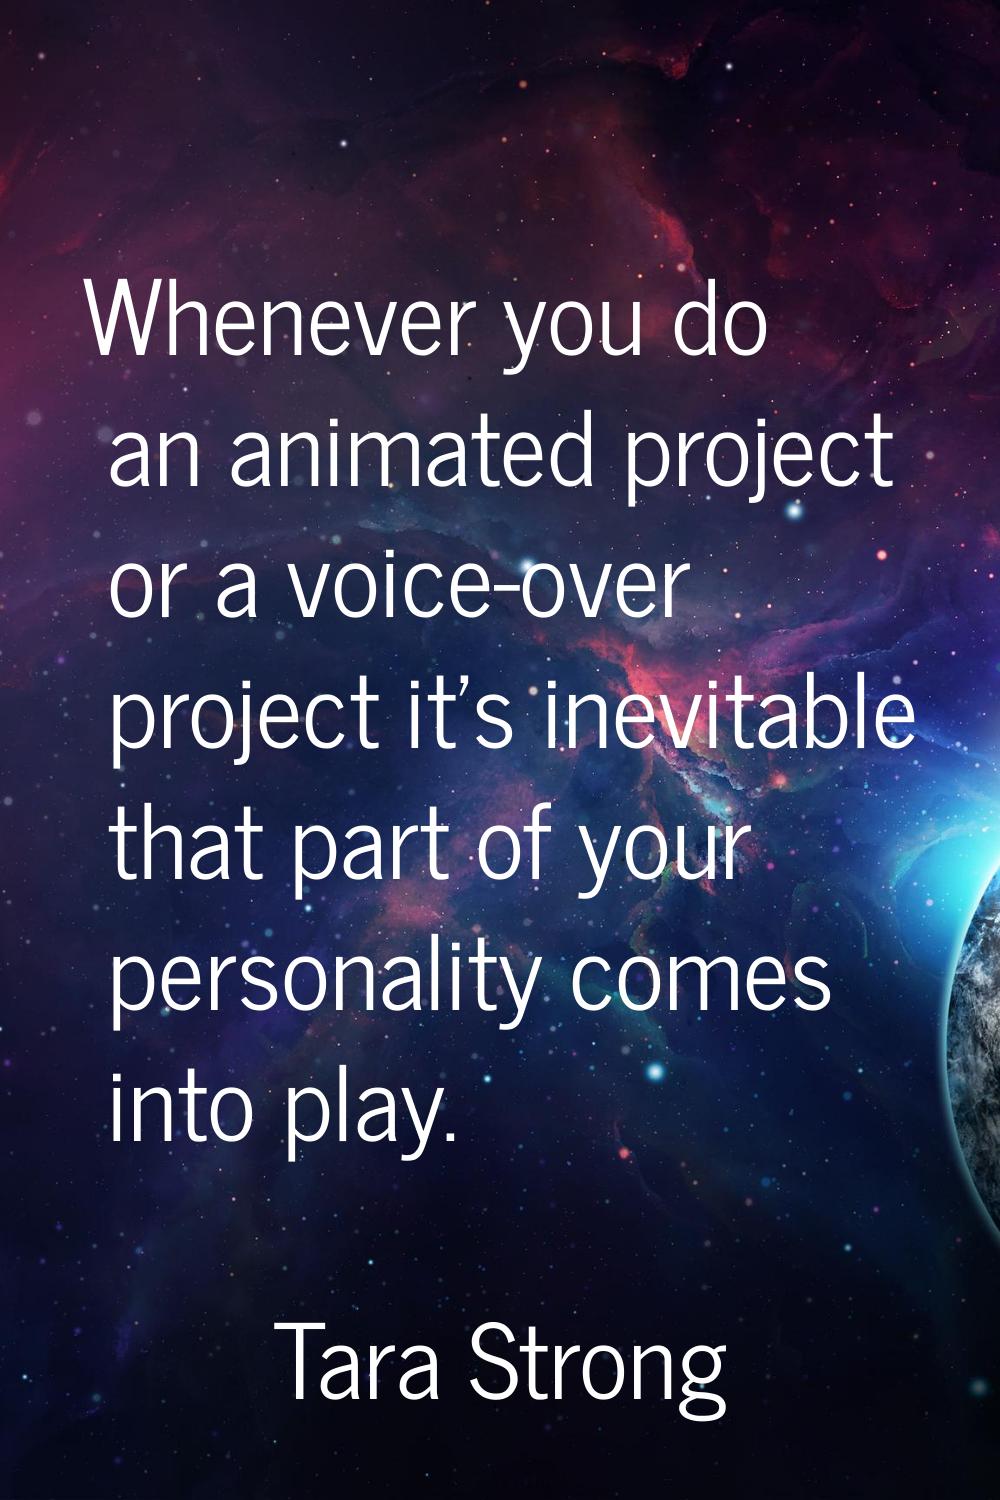 Whenever you do an animated project or a voice-over project it's inevitable that part of your perso